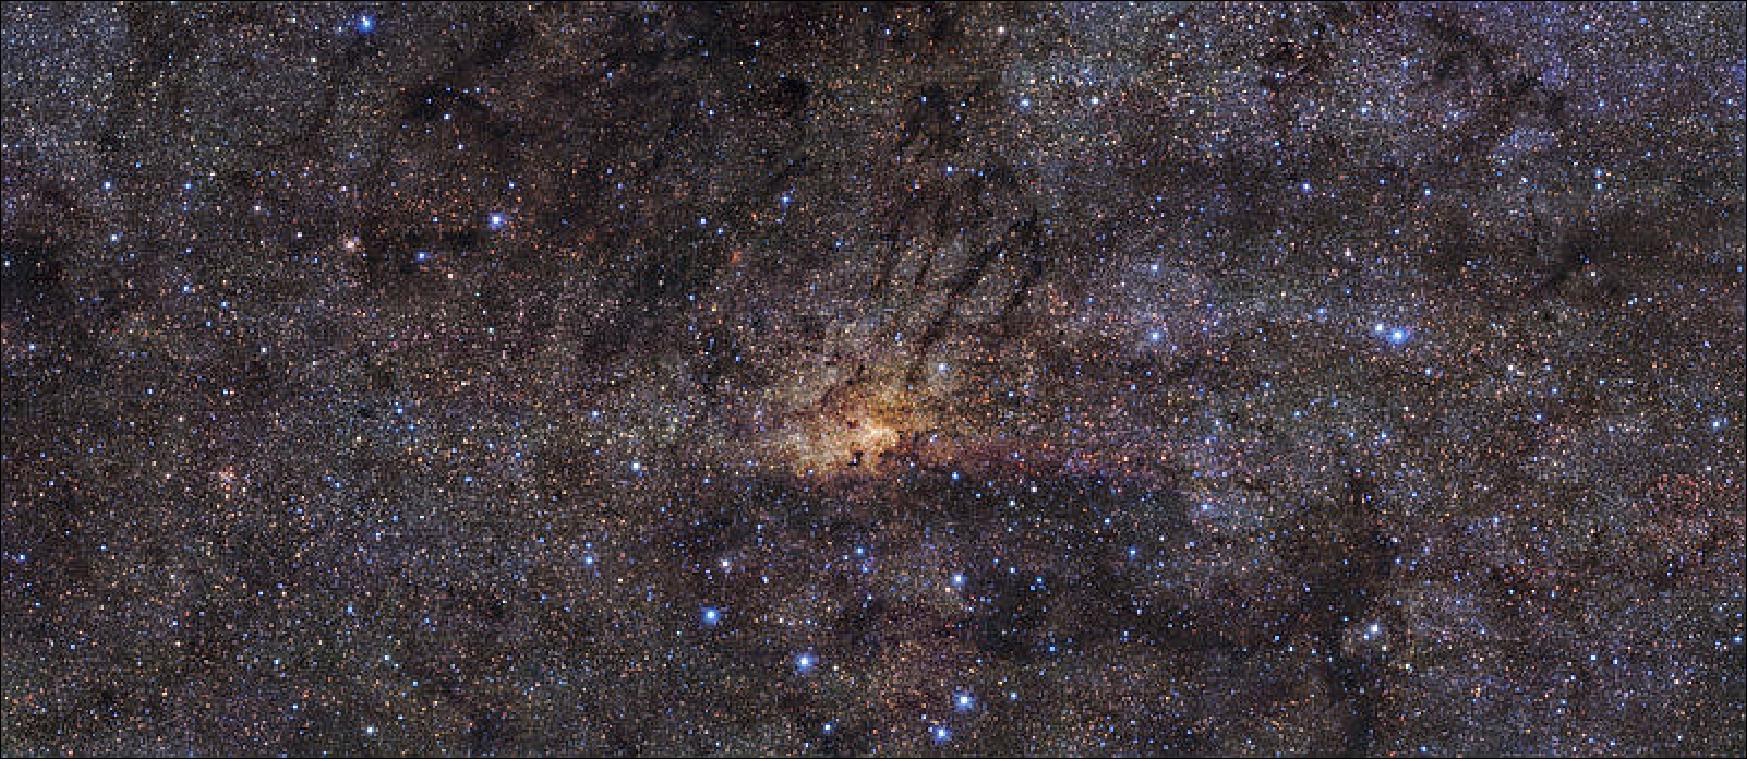 Figure 43: Taken with the HAWK-I instrument on ESO’s VLT (Very Large Telescope) in the Chilean Atacama Desert, this stunning image shows the Milky Way’s central region with an angular resolution of 0.2 arcseconds. This means the level of detail picked up by HAWK-I is roughly equivalent to seeing a football (soccer ball) in Zurich from Munich, where ESO’s headquarters are located. - The image combines observations in three different wavelength bands. The team used the broadband filters J (centered at 1250 nm, in blue), H (centered at 1635 nm, in green), and Ks (centered at 2150 nm, in red), to cover the near infrared region of the electromagnetic spectrum. By observing in this range of wavelengths, HAWK-I can peer through the dust, allowing it to see certain stars in the central region of our galaxy that would otherwise be hidden (image credit: ESO/Nogueras-Lara et al.)